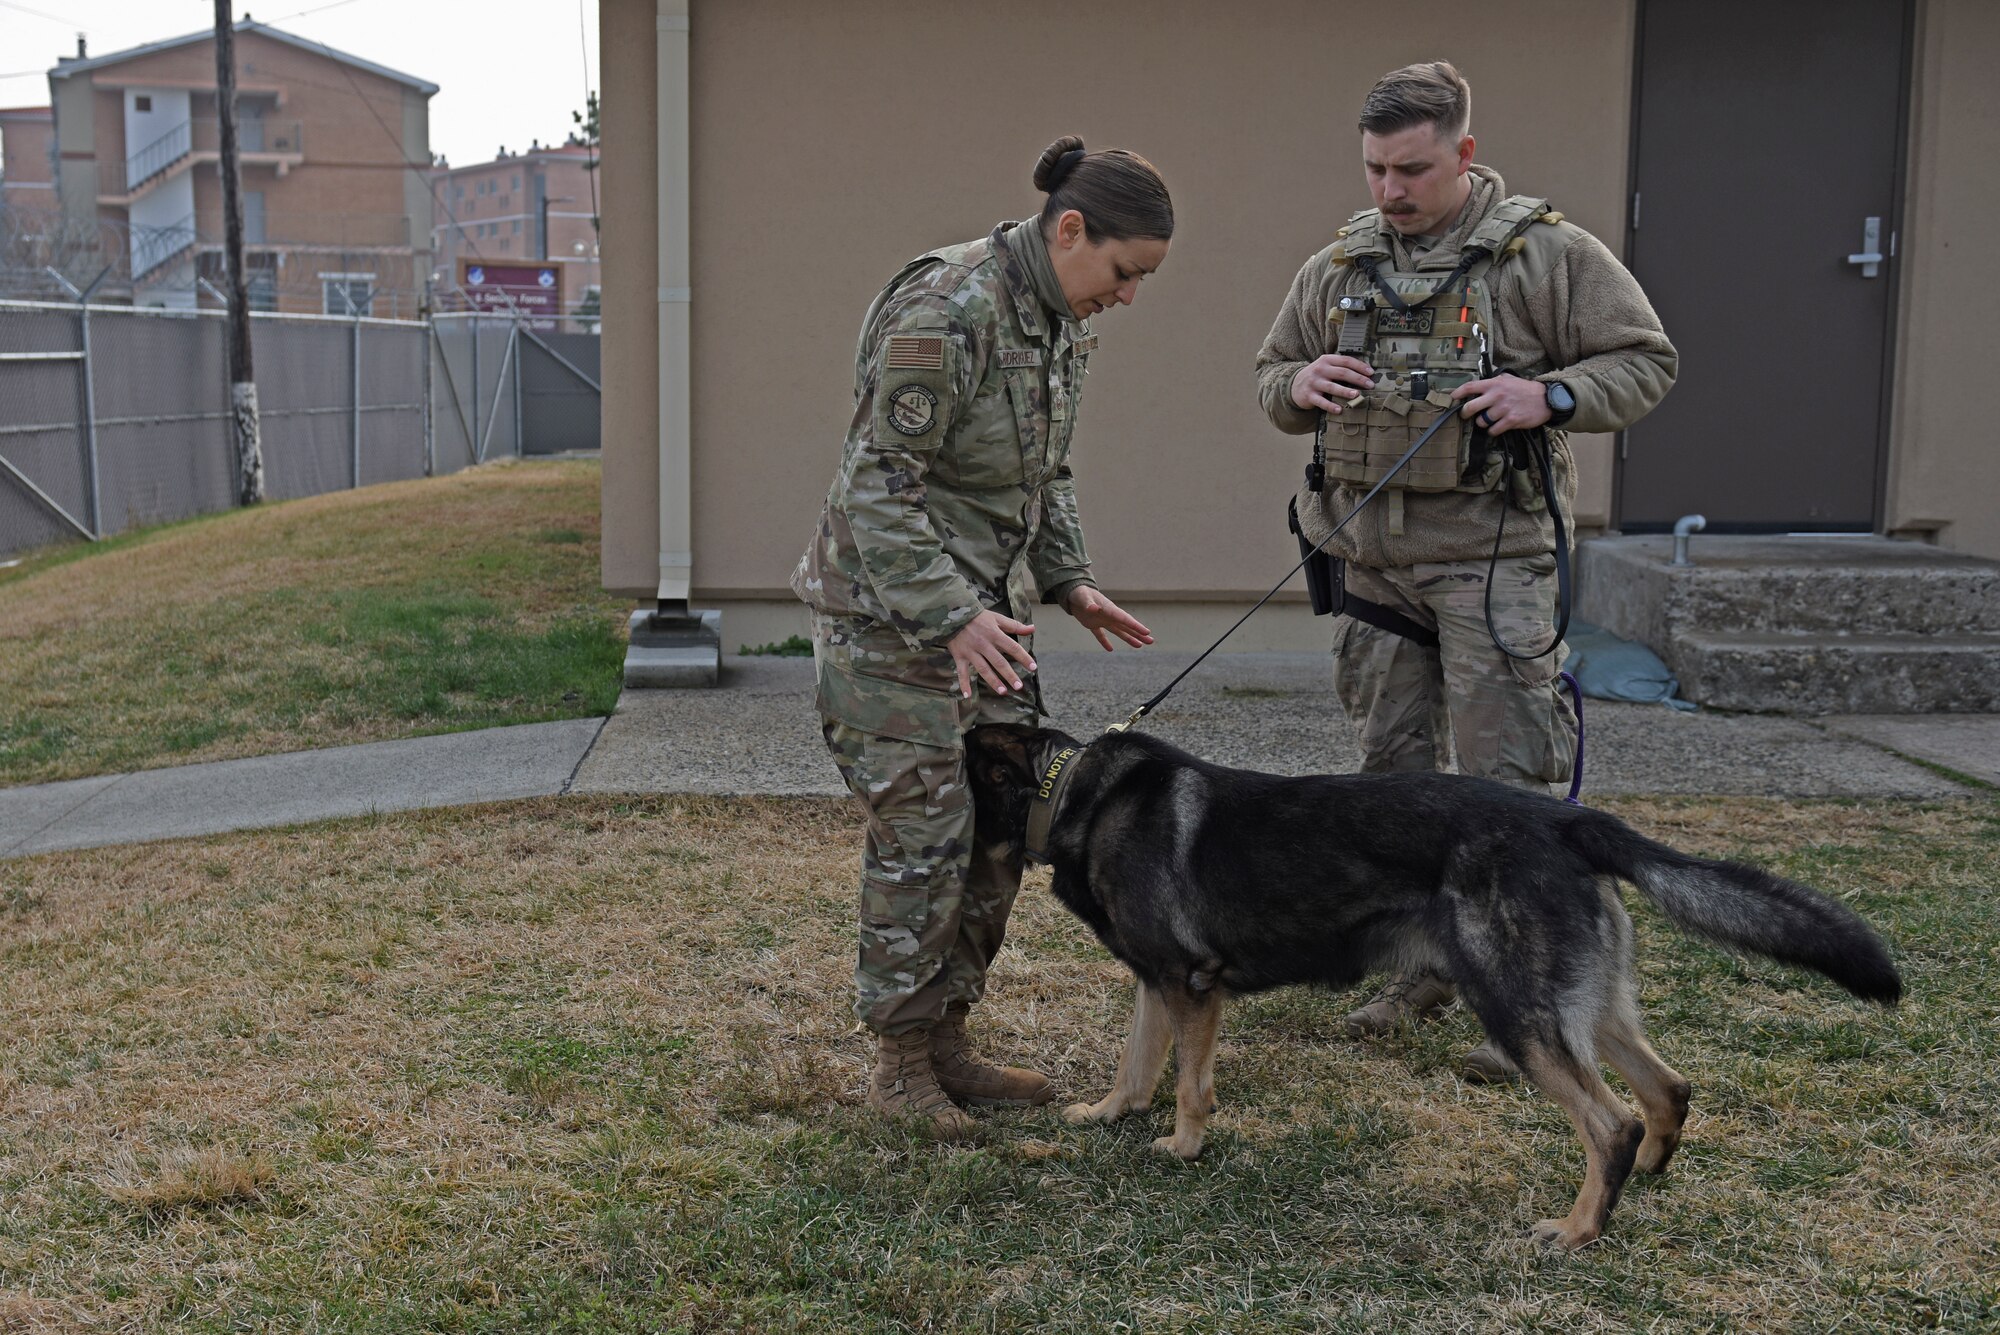 U.S. Air Force Tech. Sgt. Monica Rodriquez, 8th Security Forces Squadron Military Working Dog kennel master, demonstrates a controlled command exercise with MWD Largo for Staff Sgt. Robert Gust, 8th SFS MWD handler, at Kunsan Air Base, Republic of Korea, Dec. 10, 2019. In order to maintain discipline and order on the installation, training and readiness are of the utmost importance for the MWD section. (U.S. Air Force photo by Staff Sgt. Mackenzie Mendez)